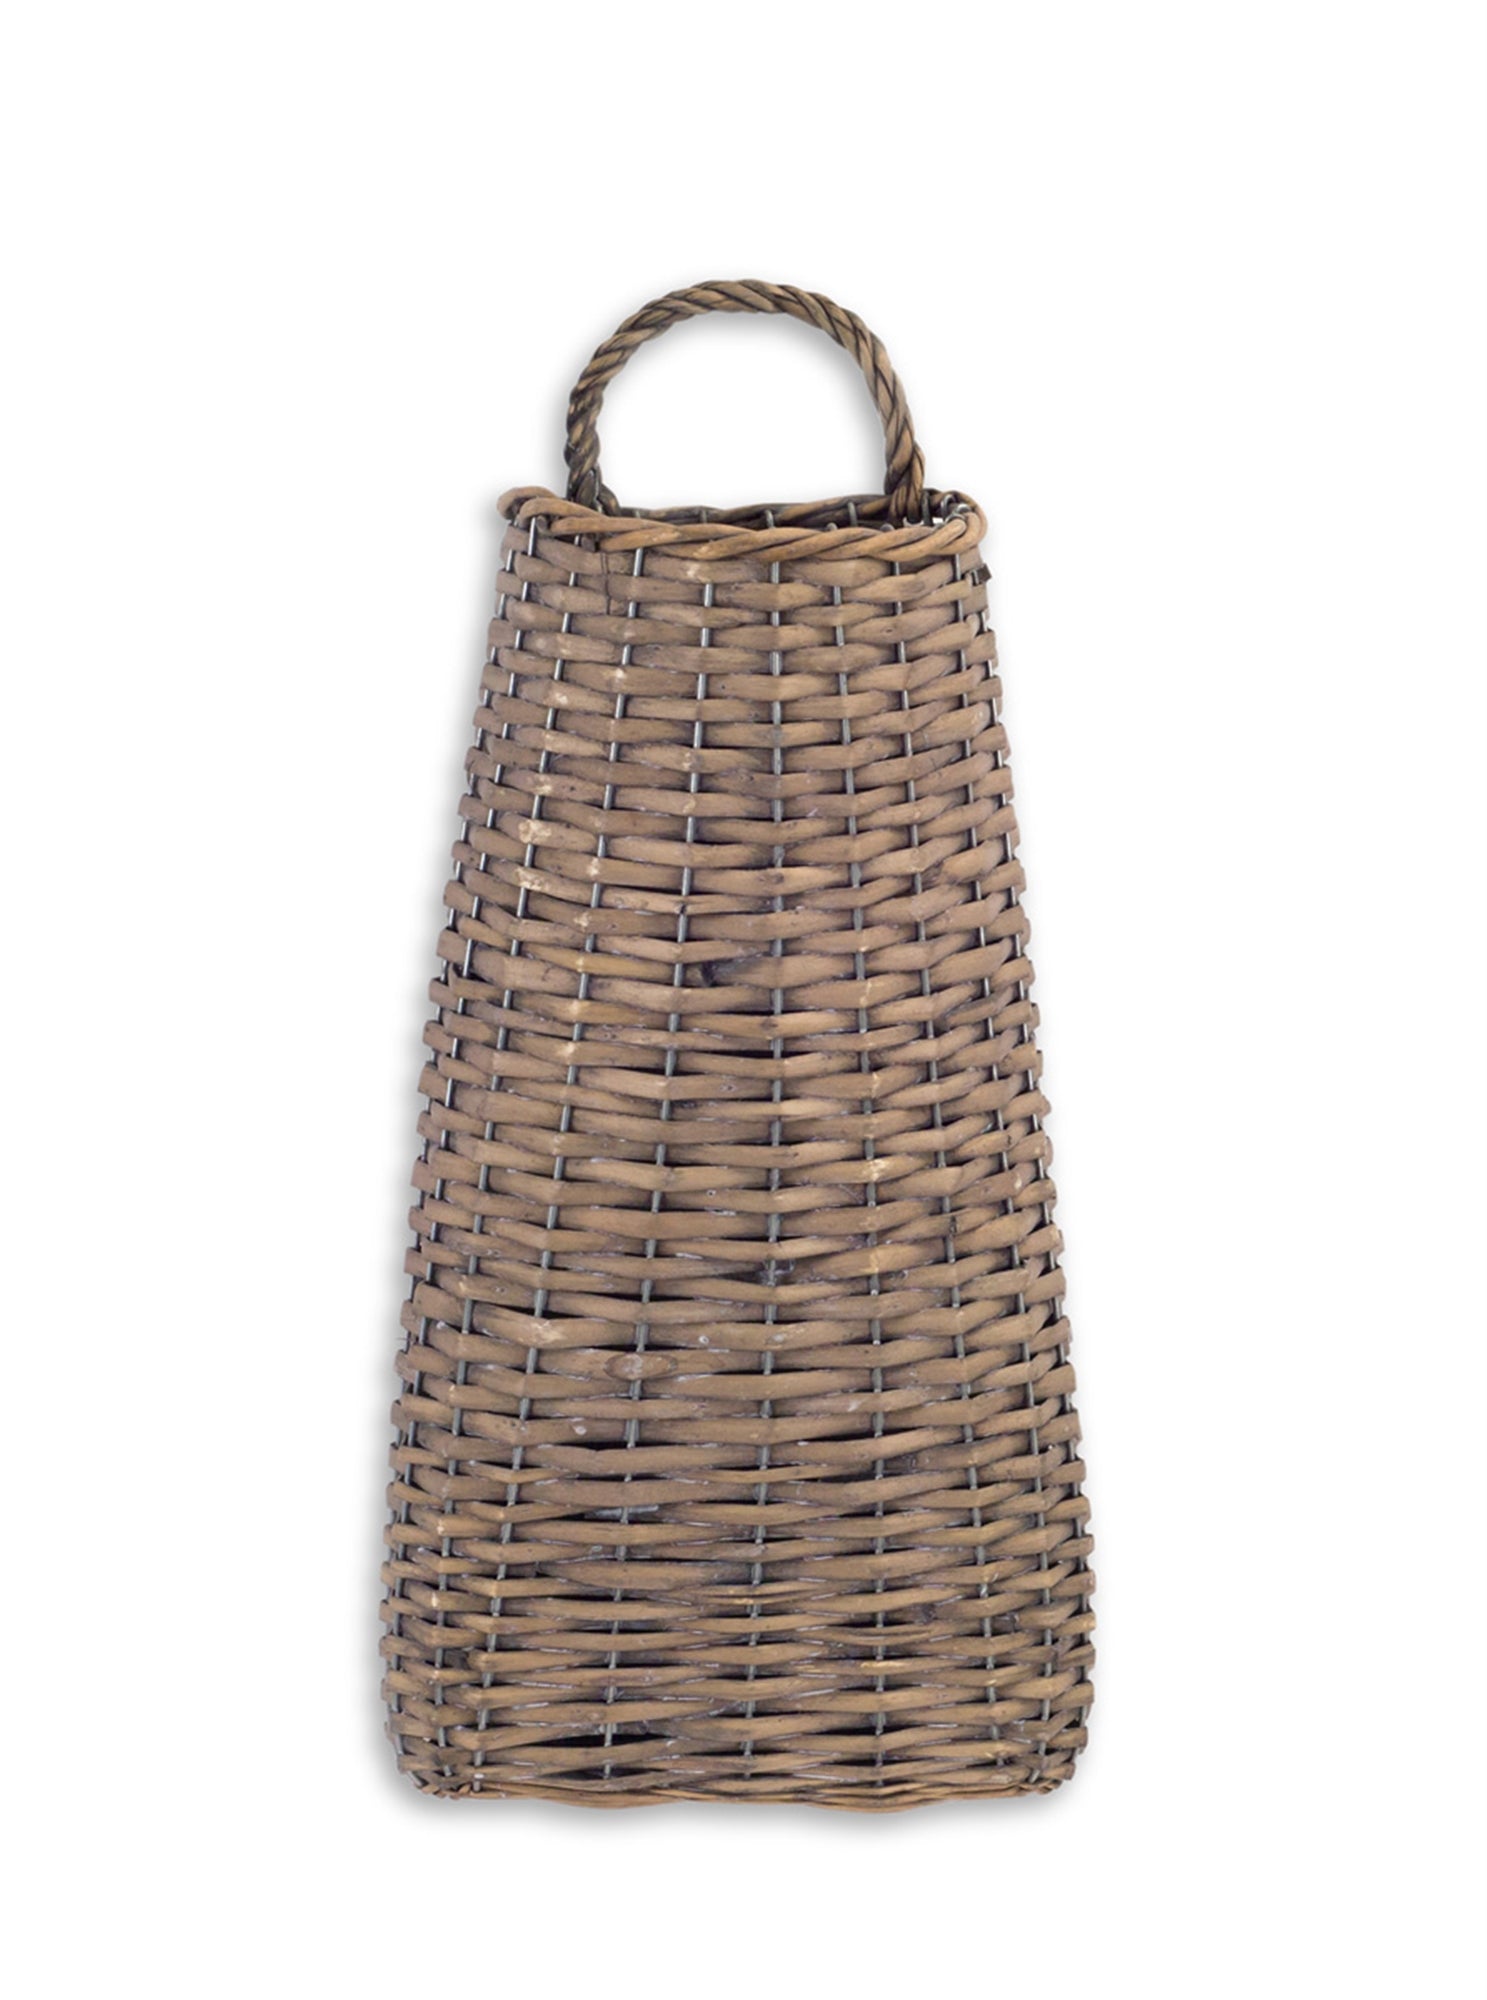 17" Willow Wall Basket